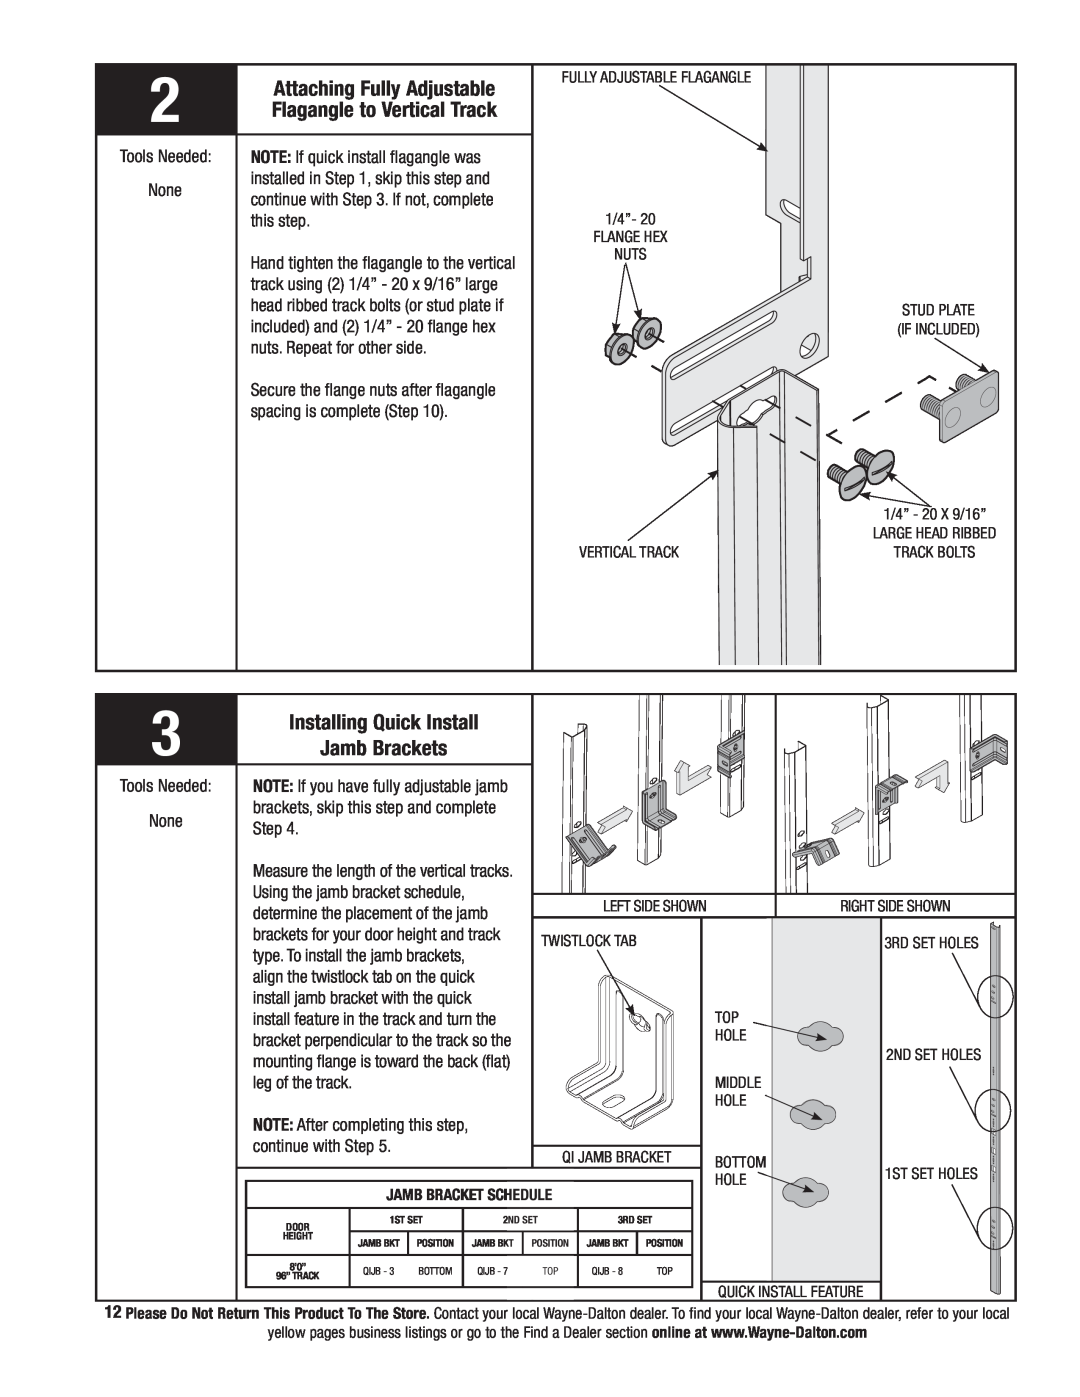 Wayne-Dalton 9800 Attaching Fully Adjustable, Flagangle to Vertical Track, Installing Quick Install, Jamb Brackets 